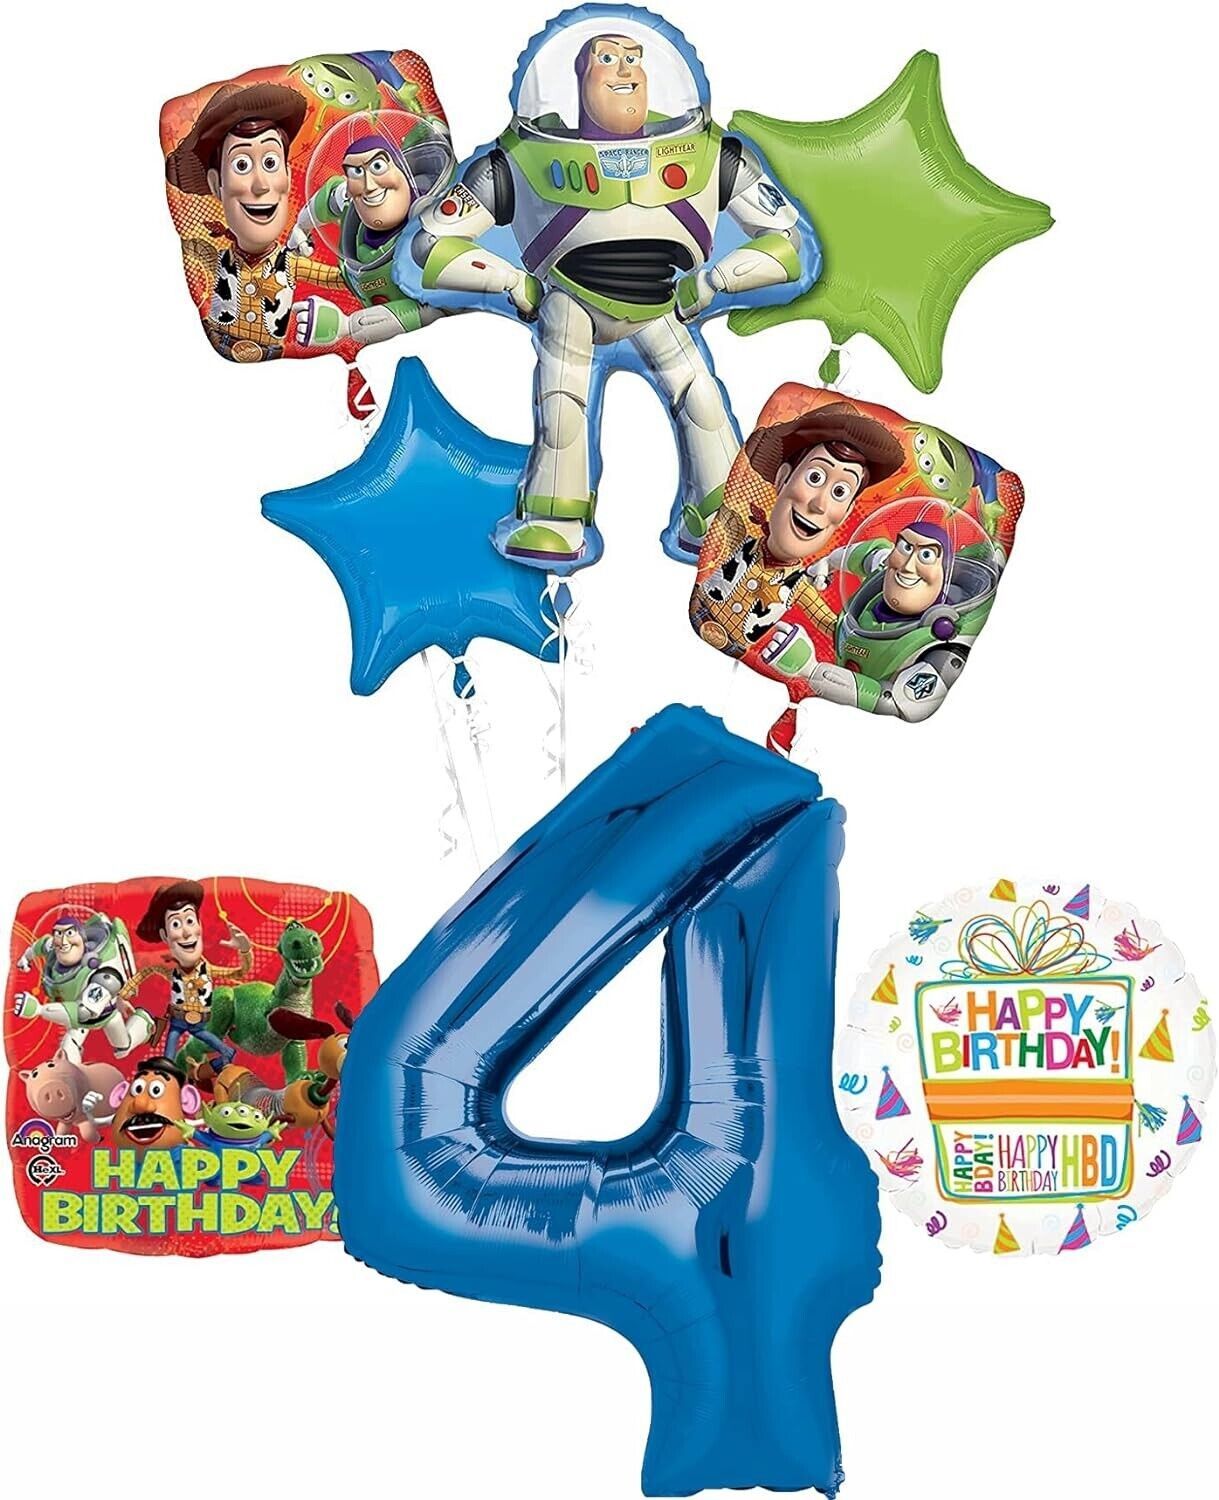 Primary image for Toy story 4th Birthday Party Supplies and Balloon Bouquet Decorations (34")